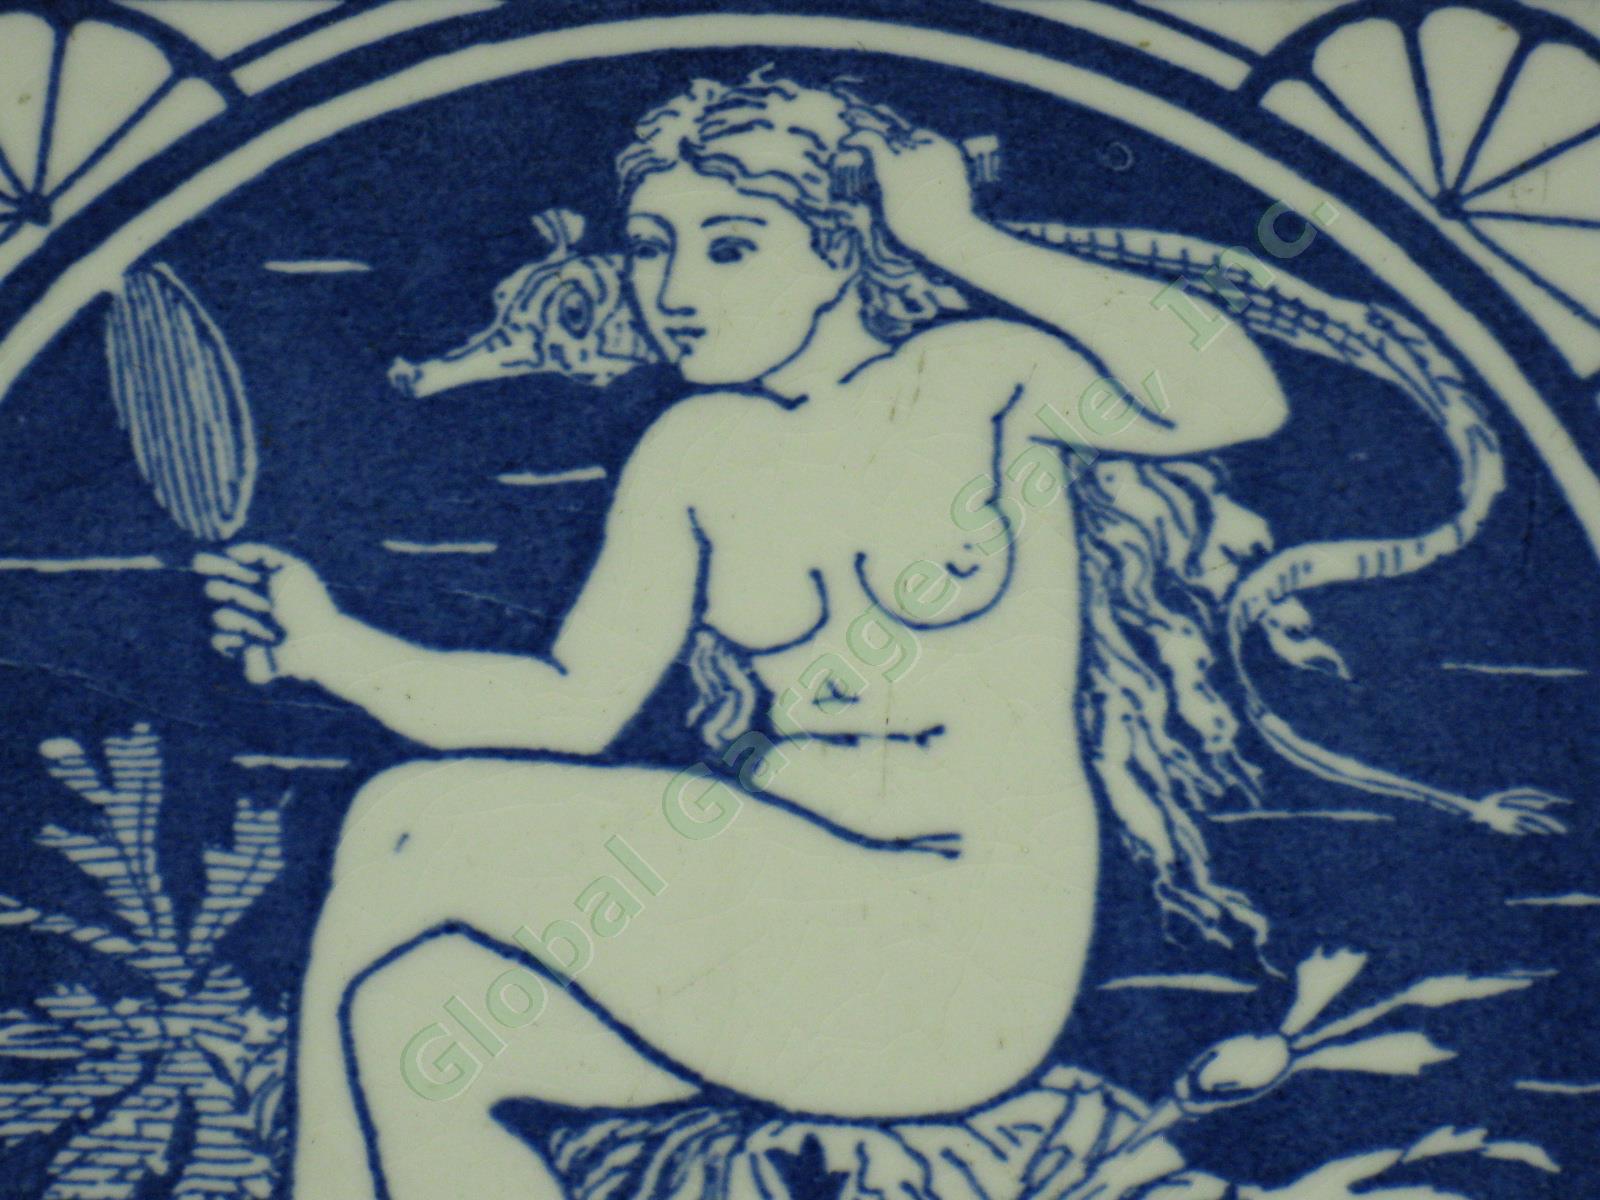 Antique 1800s Mintons China Works Stoke On Trent Ceramic Pottery Tile Nude Woman 1